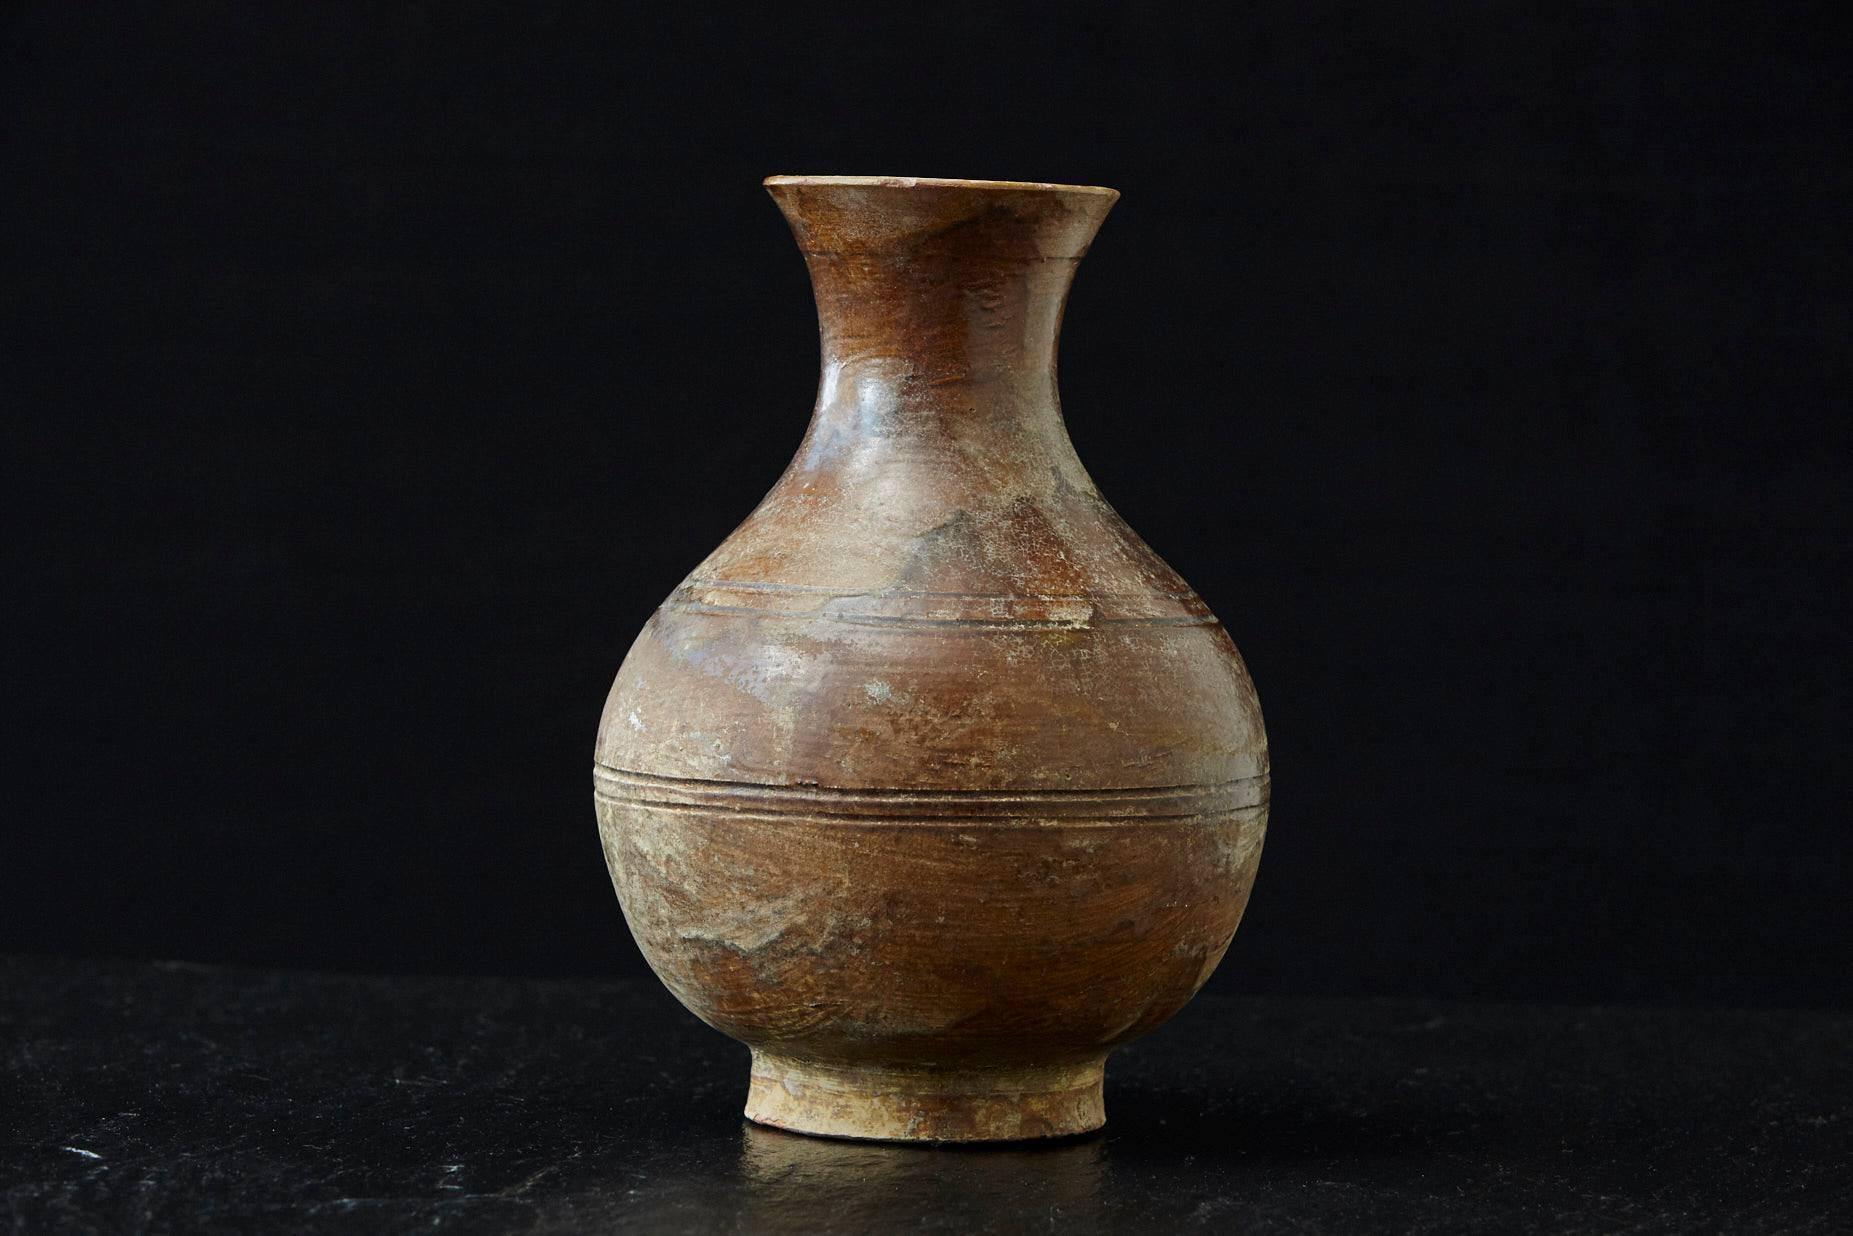 Beautiful antique Italien terra cotta vase with bottle shape and brown glaze, fantastic patina. There are a few very old, almost natural chips by now, to the top rim of the vase from usage over the decades, please refer to the photos. From Sardinia,